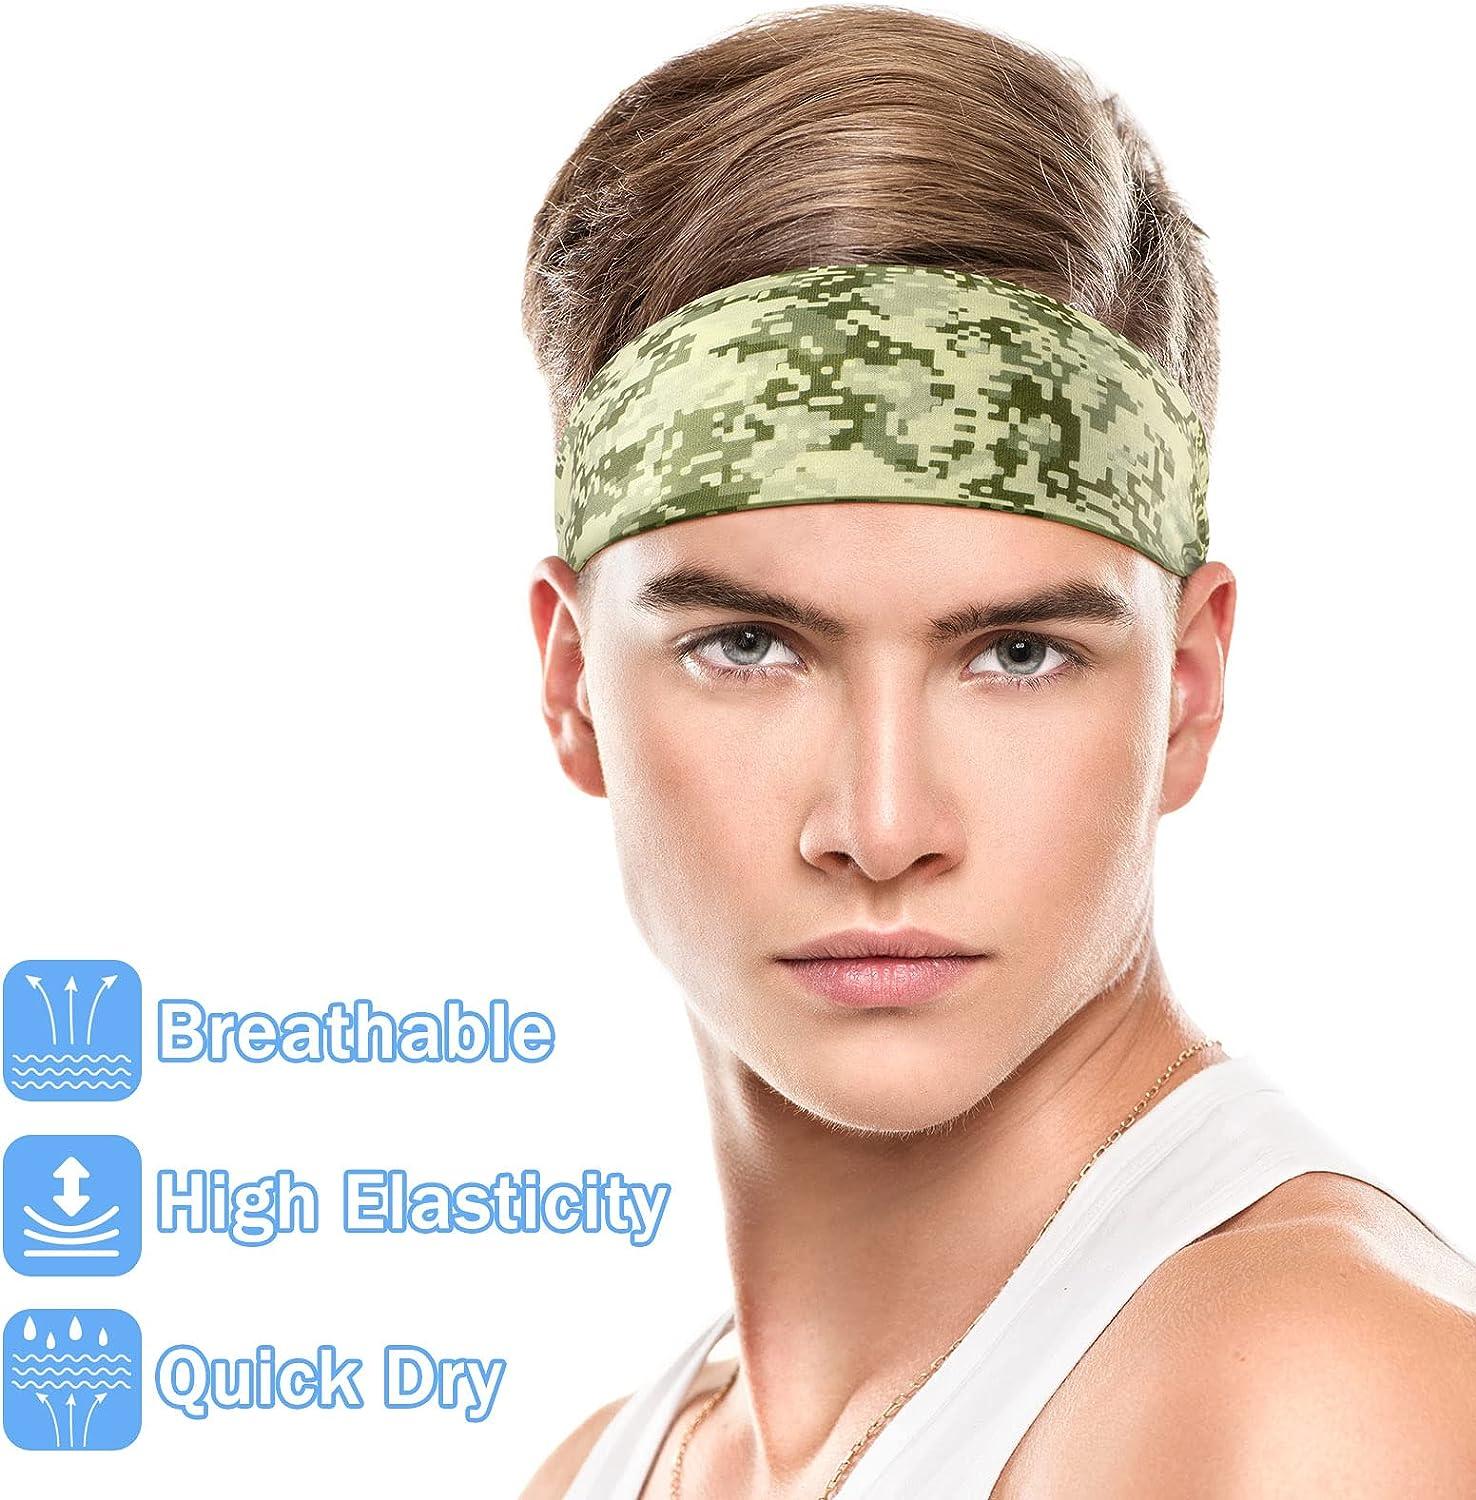 Sweatbands for Men, Breathable Quick Dry Workout Headbands